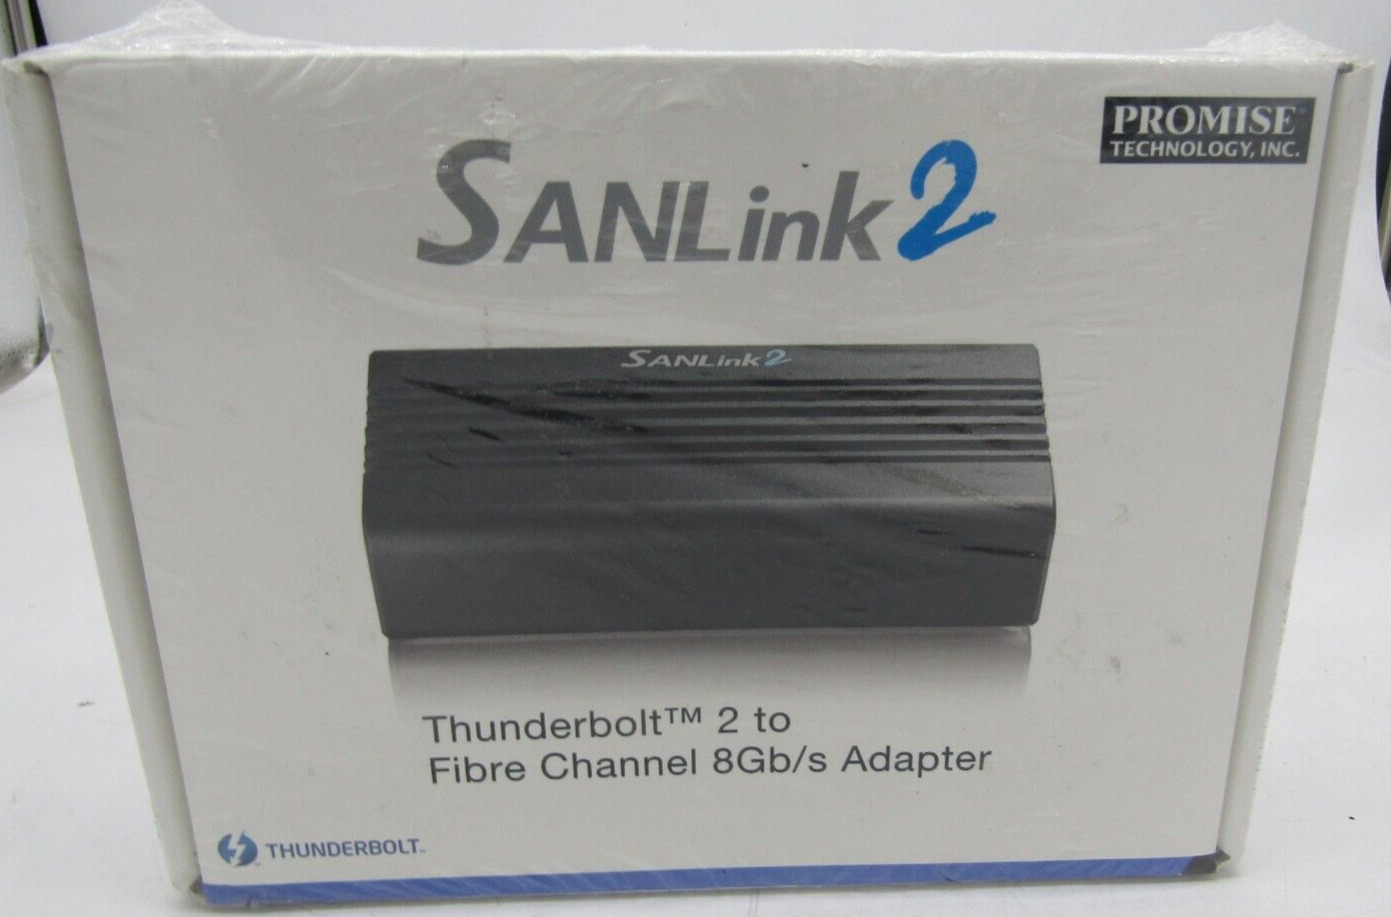 PROMISE TECH SANLINK2 F2102 Thunderbolt 2 to fibre channel 8gb/s adapter SEALED